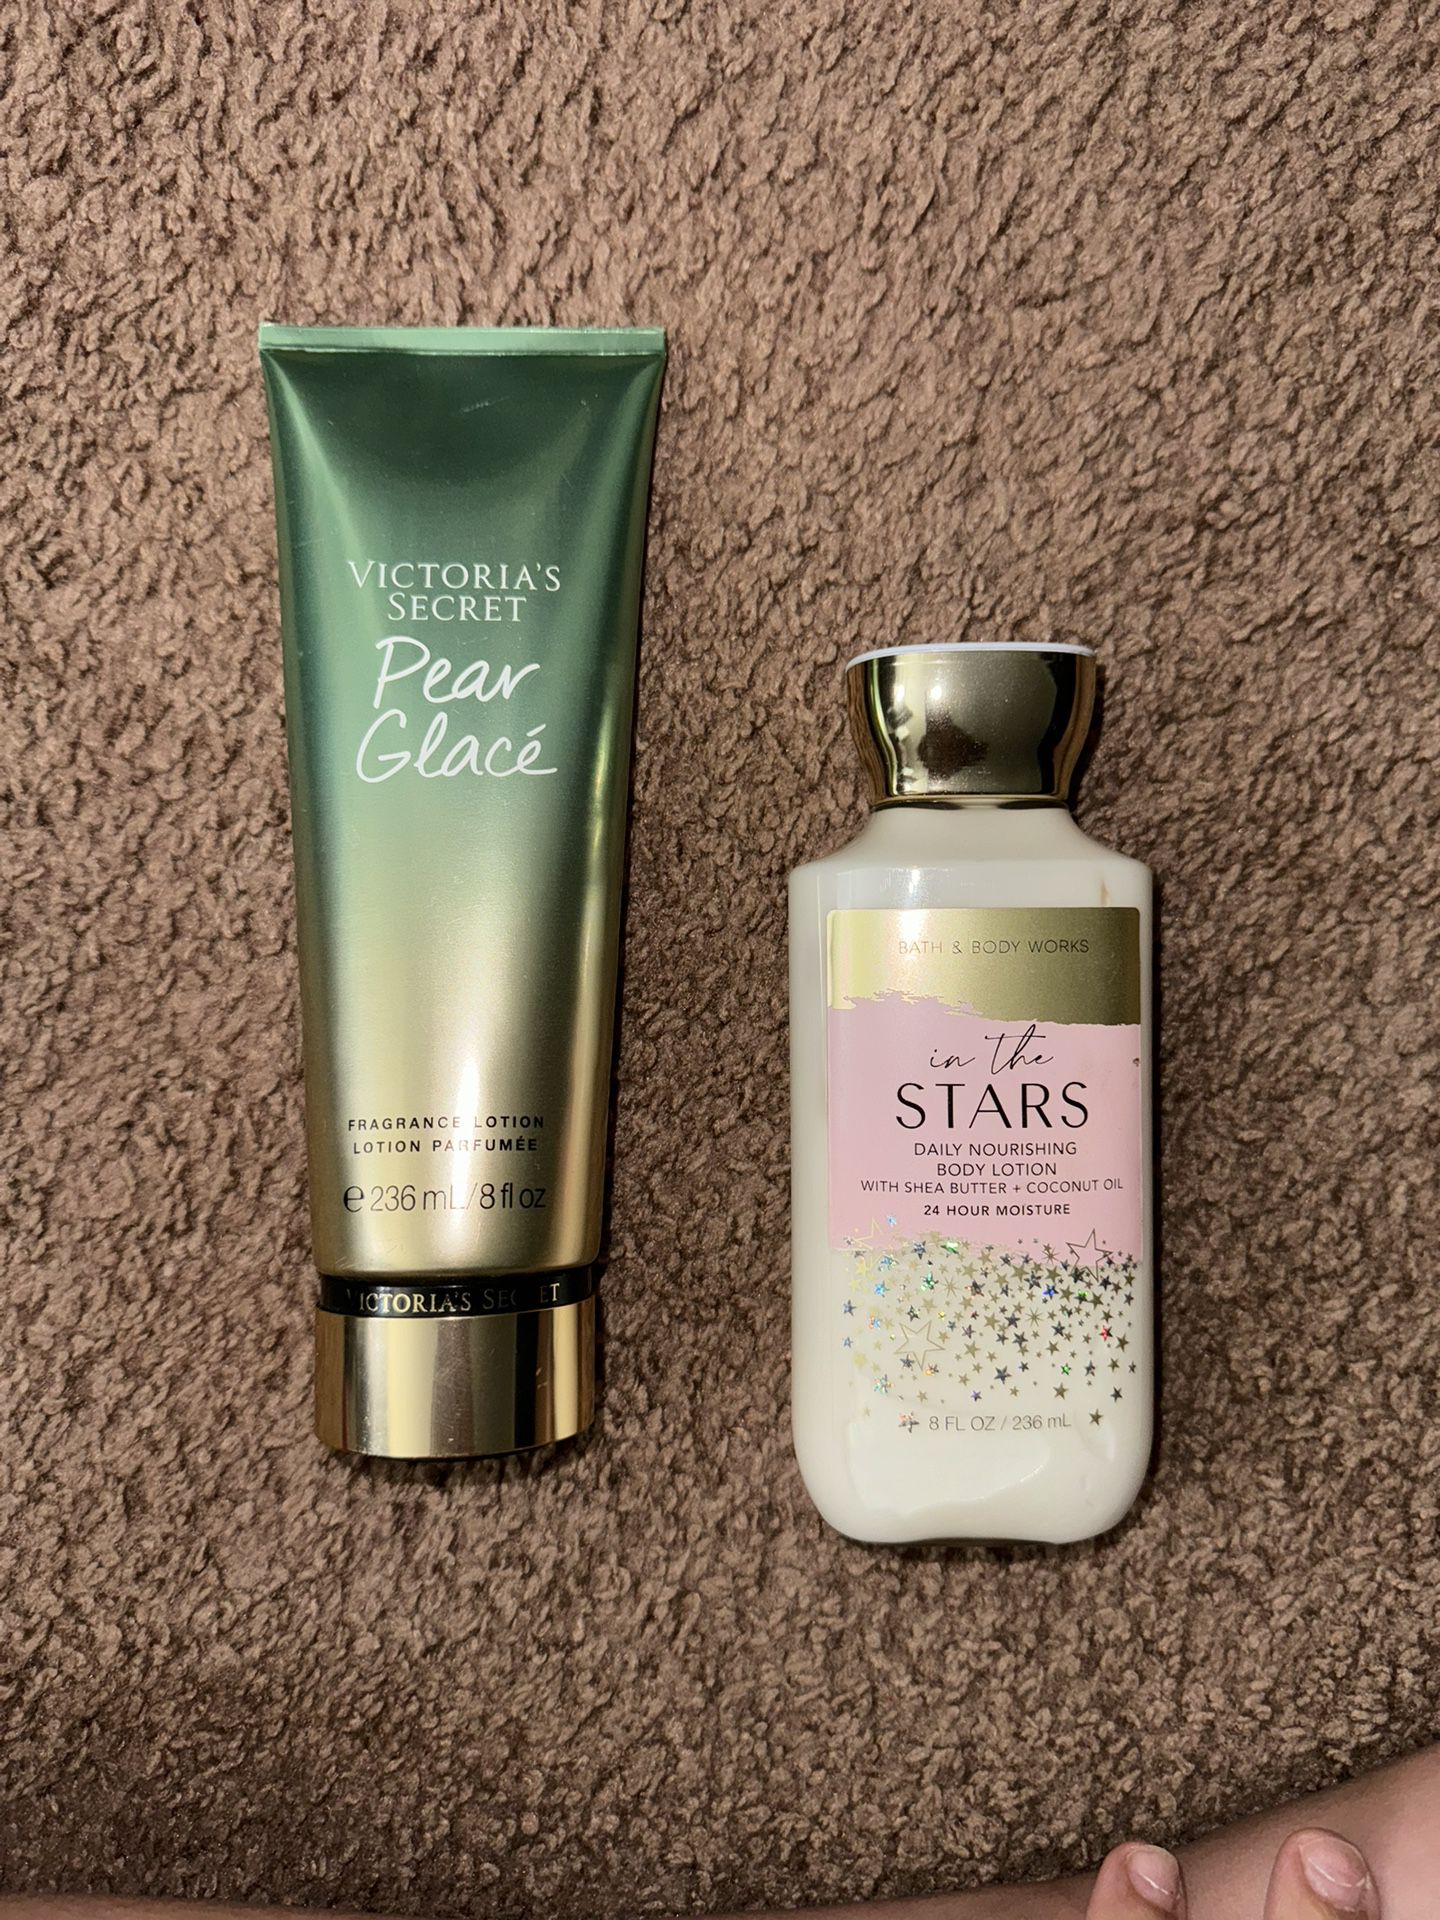 Bath & Body Work Scented Lotions!… 